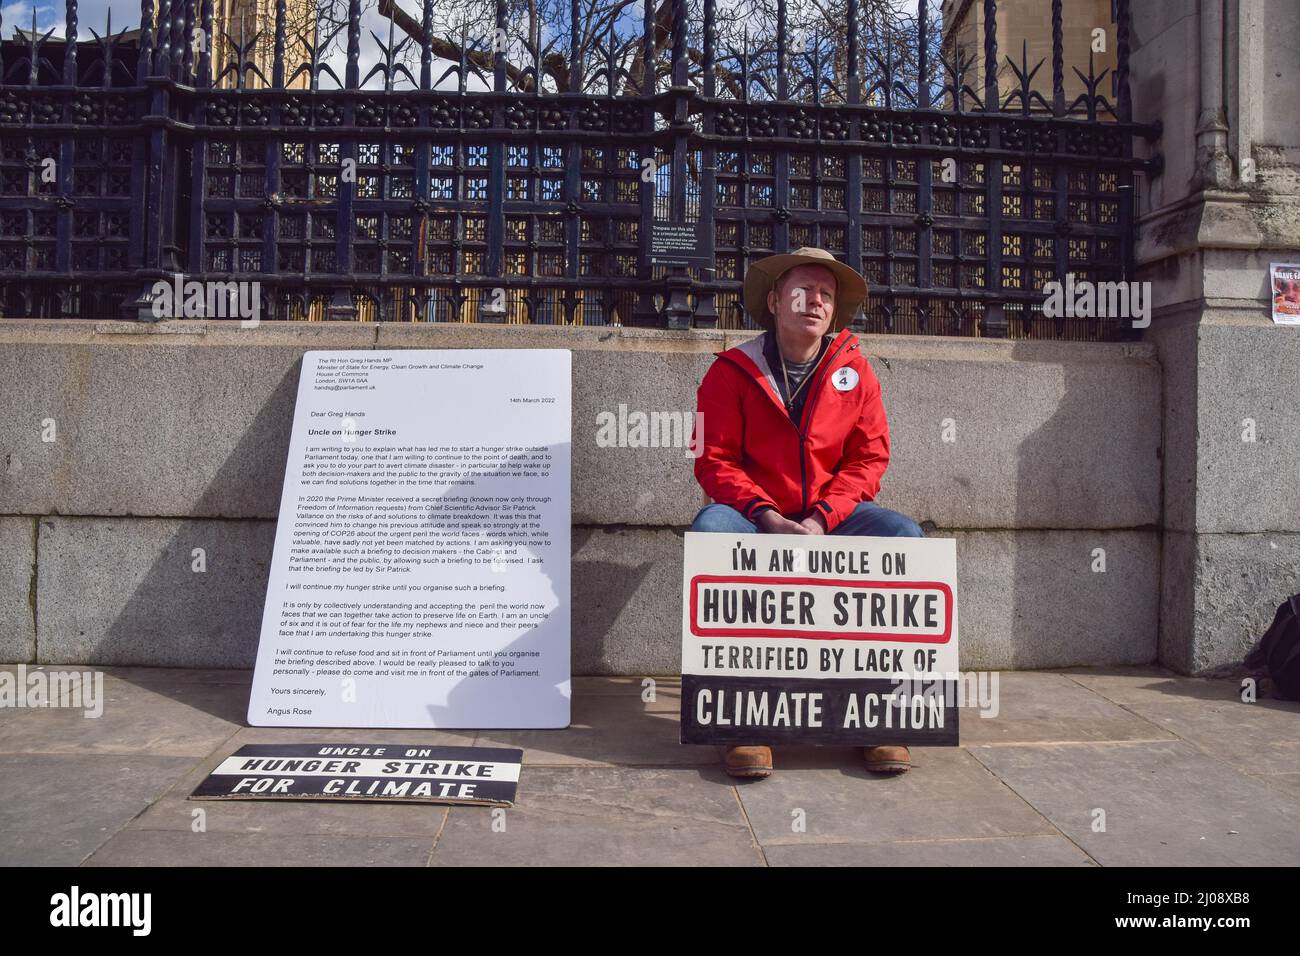 London, UK. 17th March 2022. A man by the name of Angus Rose has begun a hunger strike outside the UK Parliament to pressure the government into taking action on climate change. According to the protester, the Prime Minister received a secret briefing in 2020 from the Chief Scientific Advisor on the risks of, and solutions to, the climate crisis, and is asking the PM to make this briefing public. Credit: Vuk Valcic/Alamy Live News Stock Photo